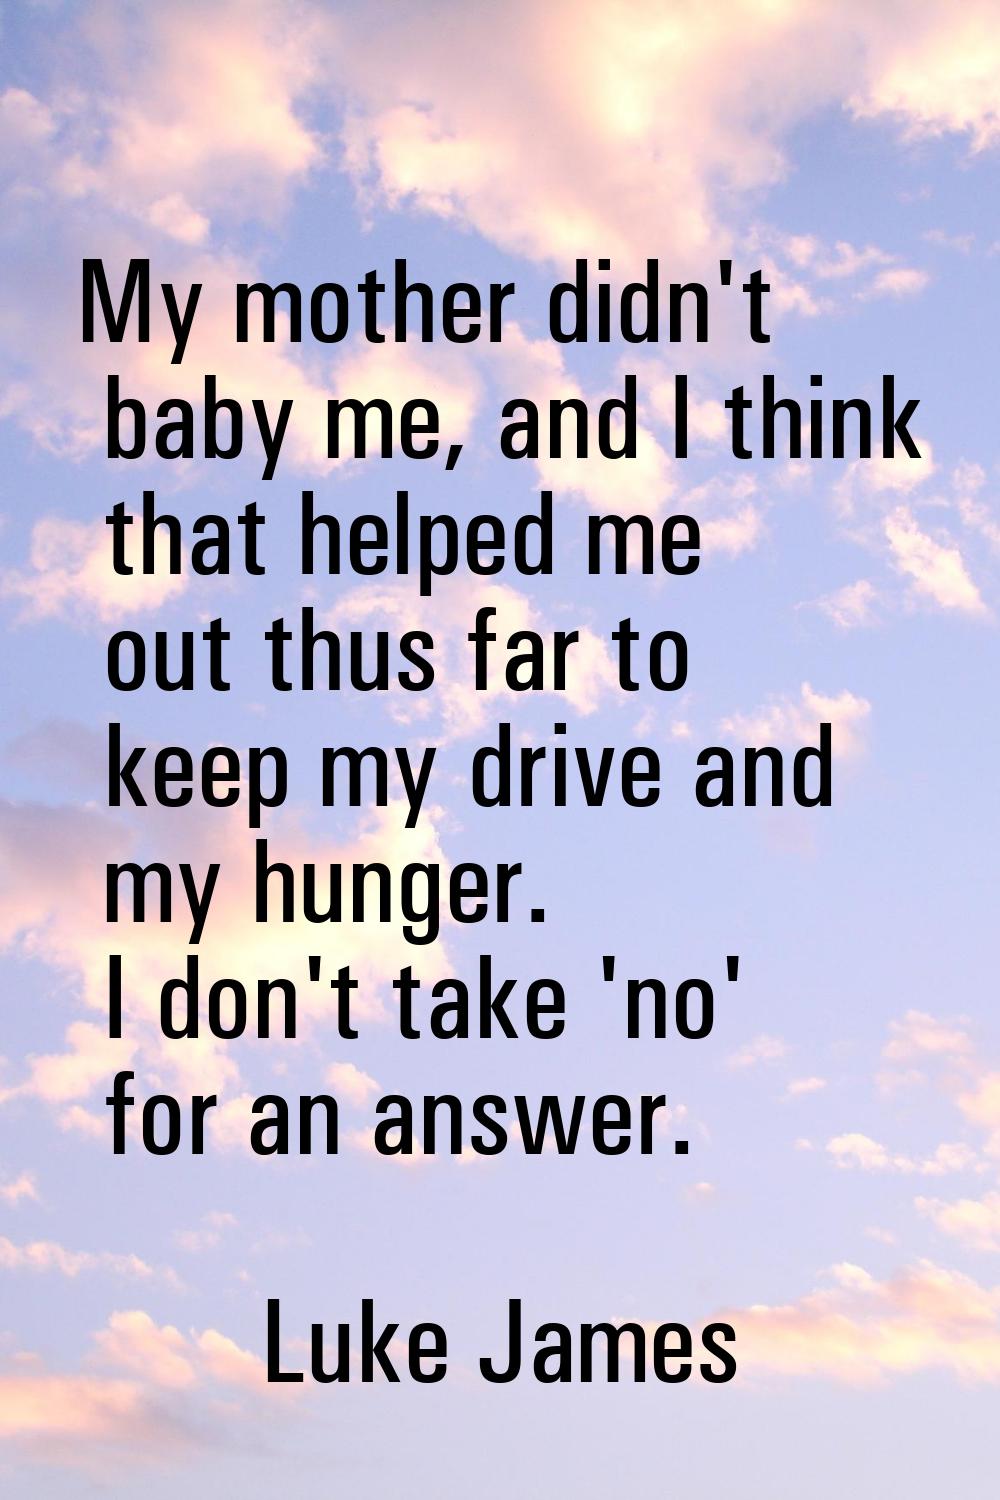 My mother didn't baby me, and I think that helped me out thus far to keep my drive and my hunger. I